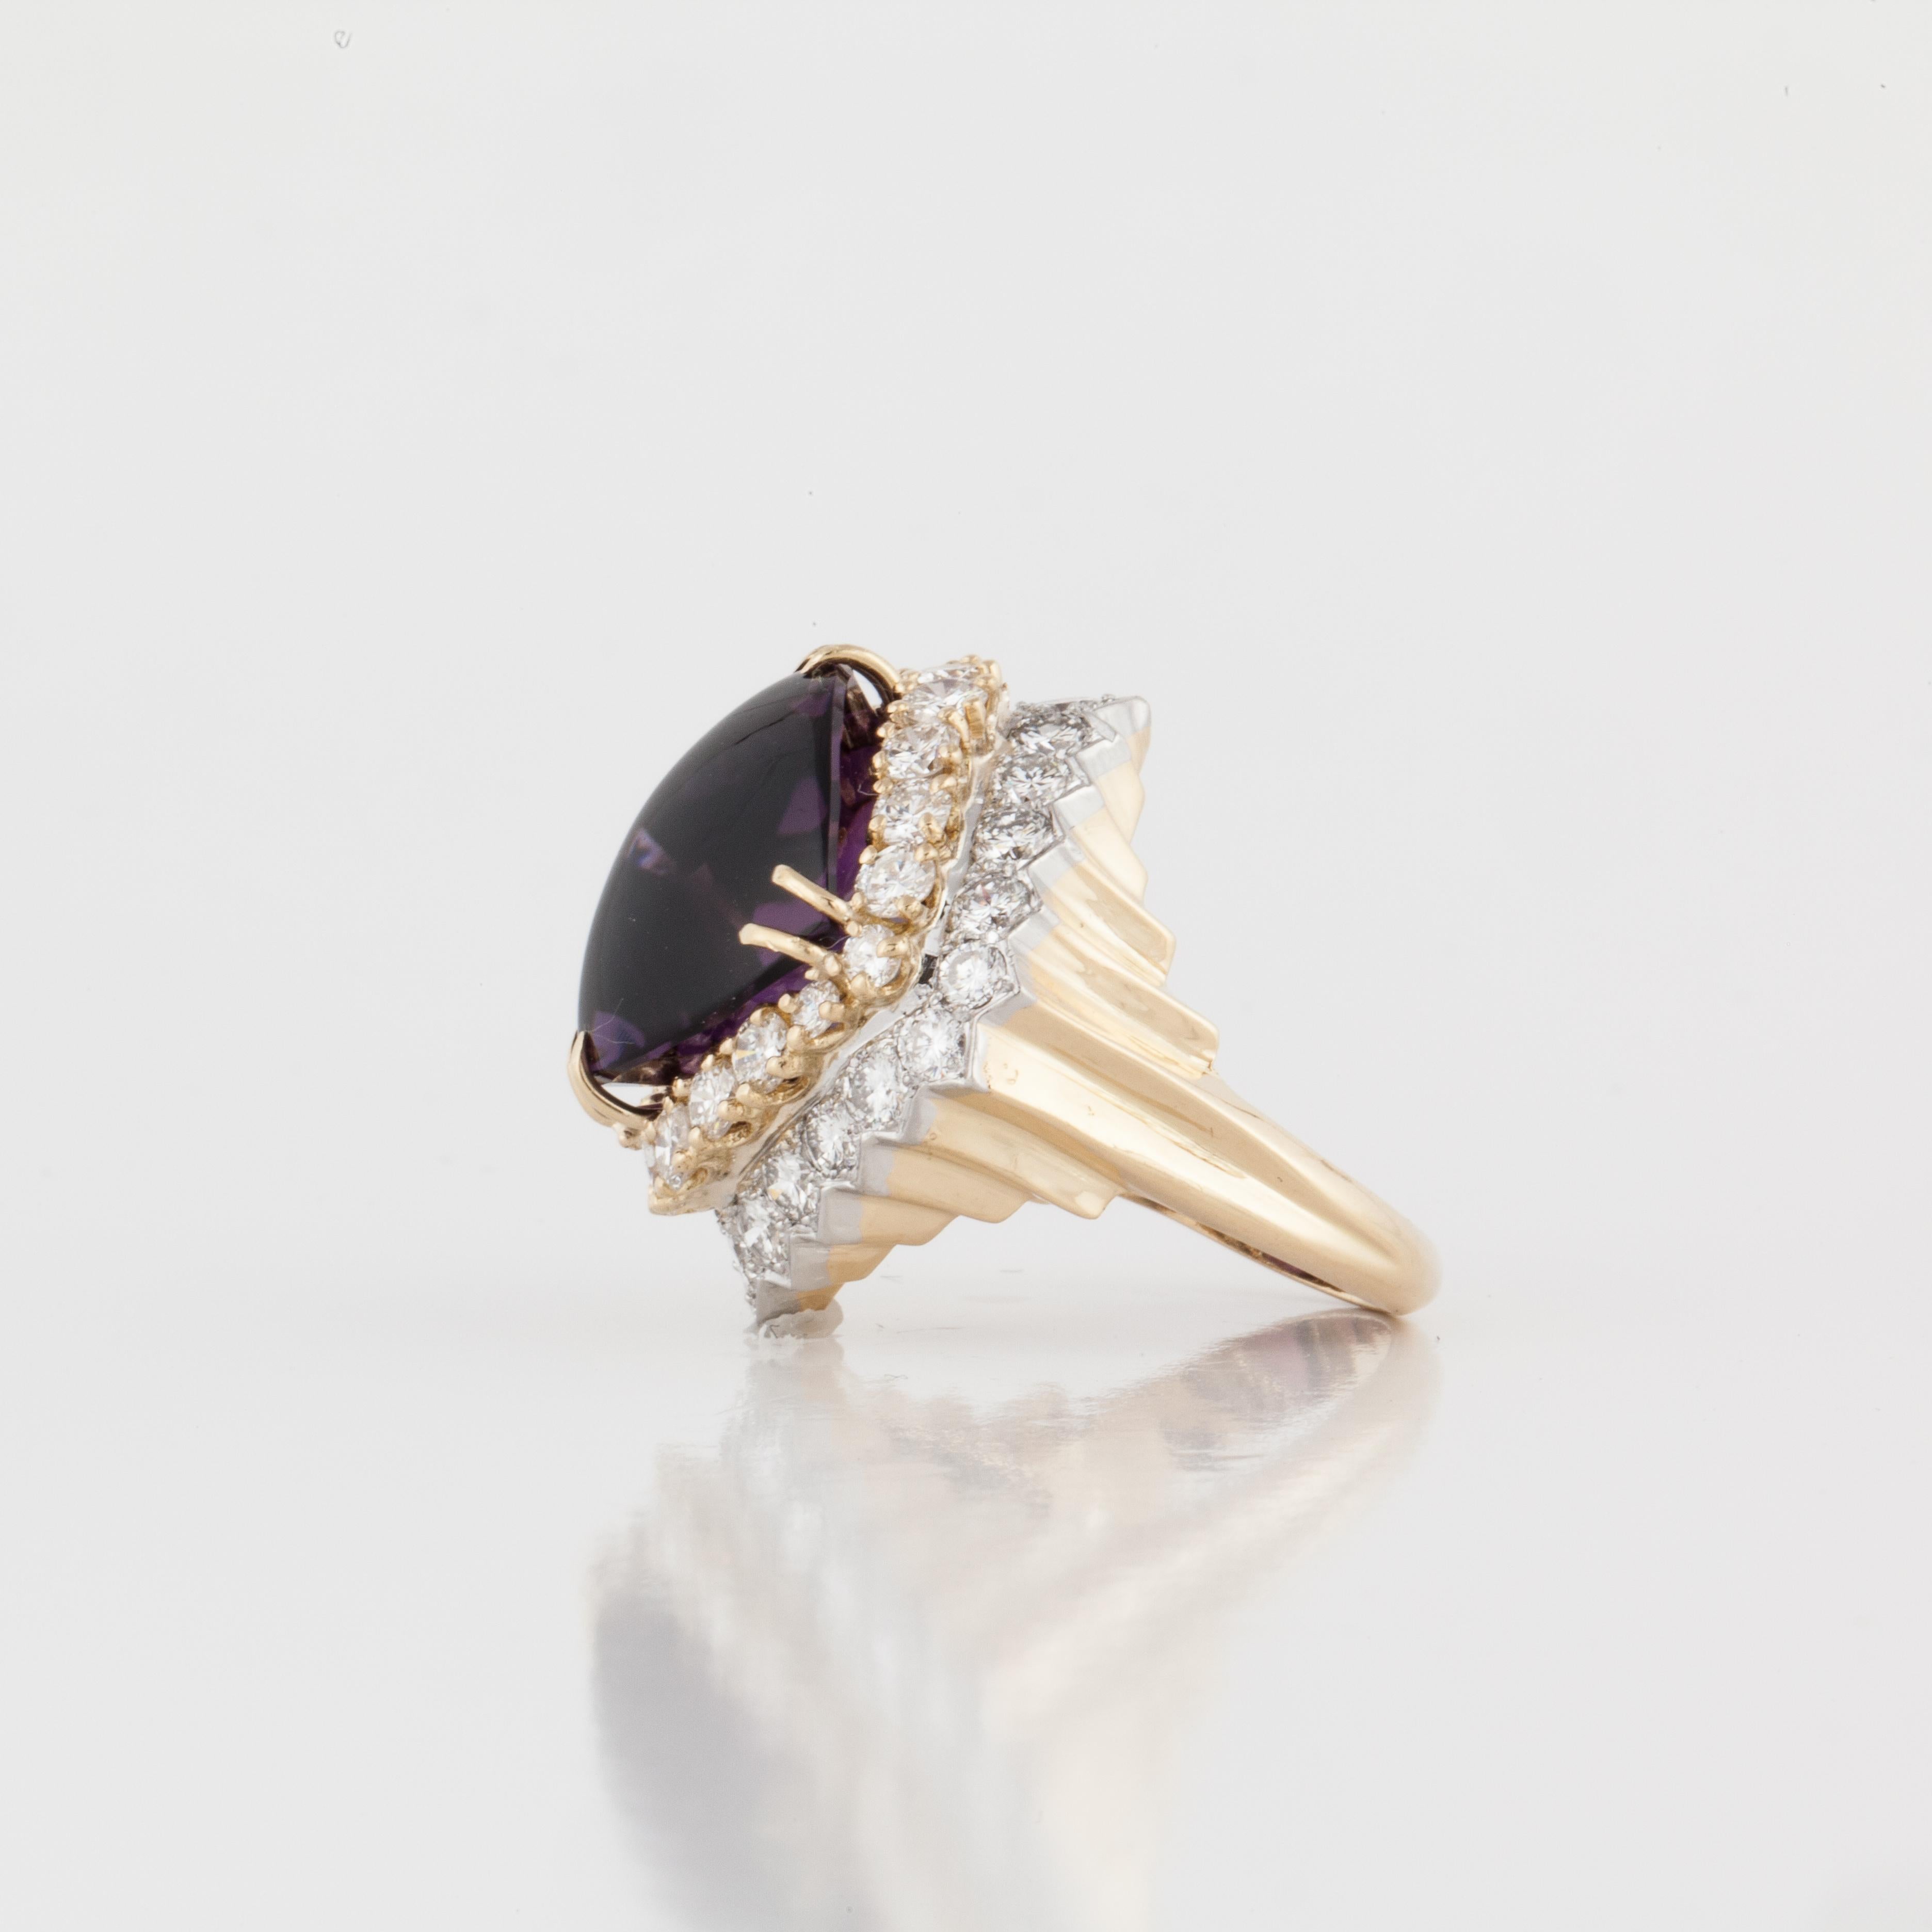 Mixed Cut Cabochon Amethyst and Diamond Ring in 18K Gold For Sale